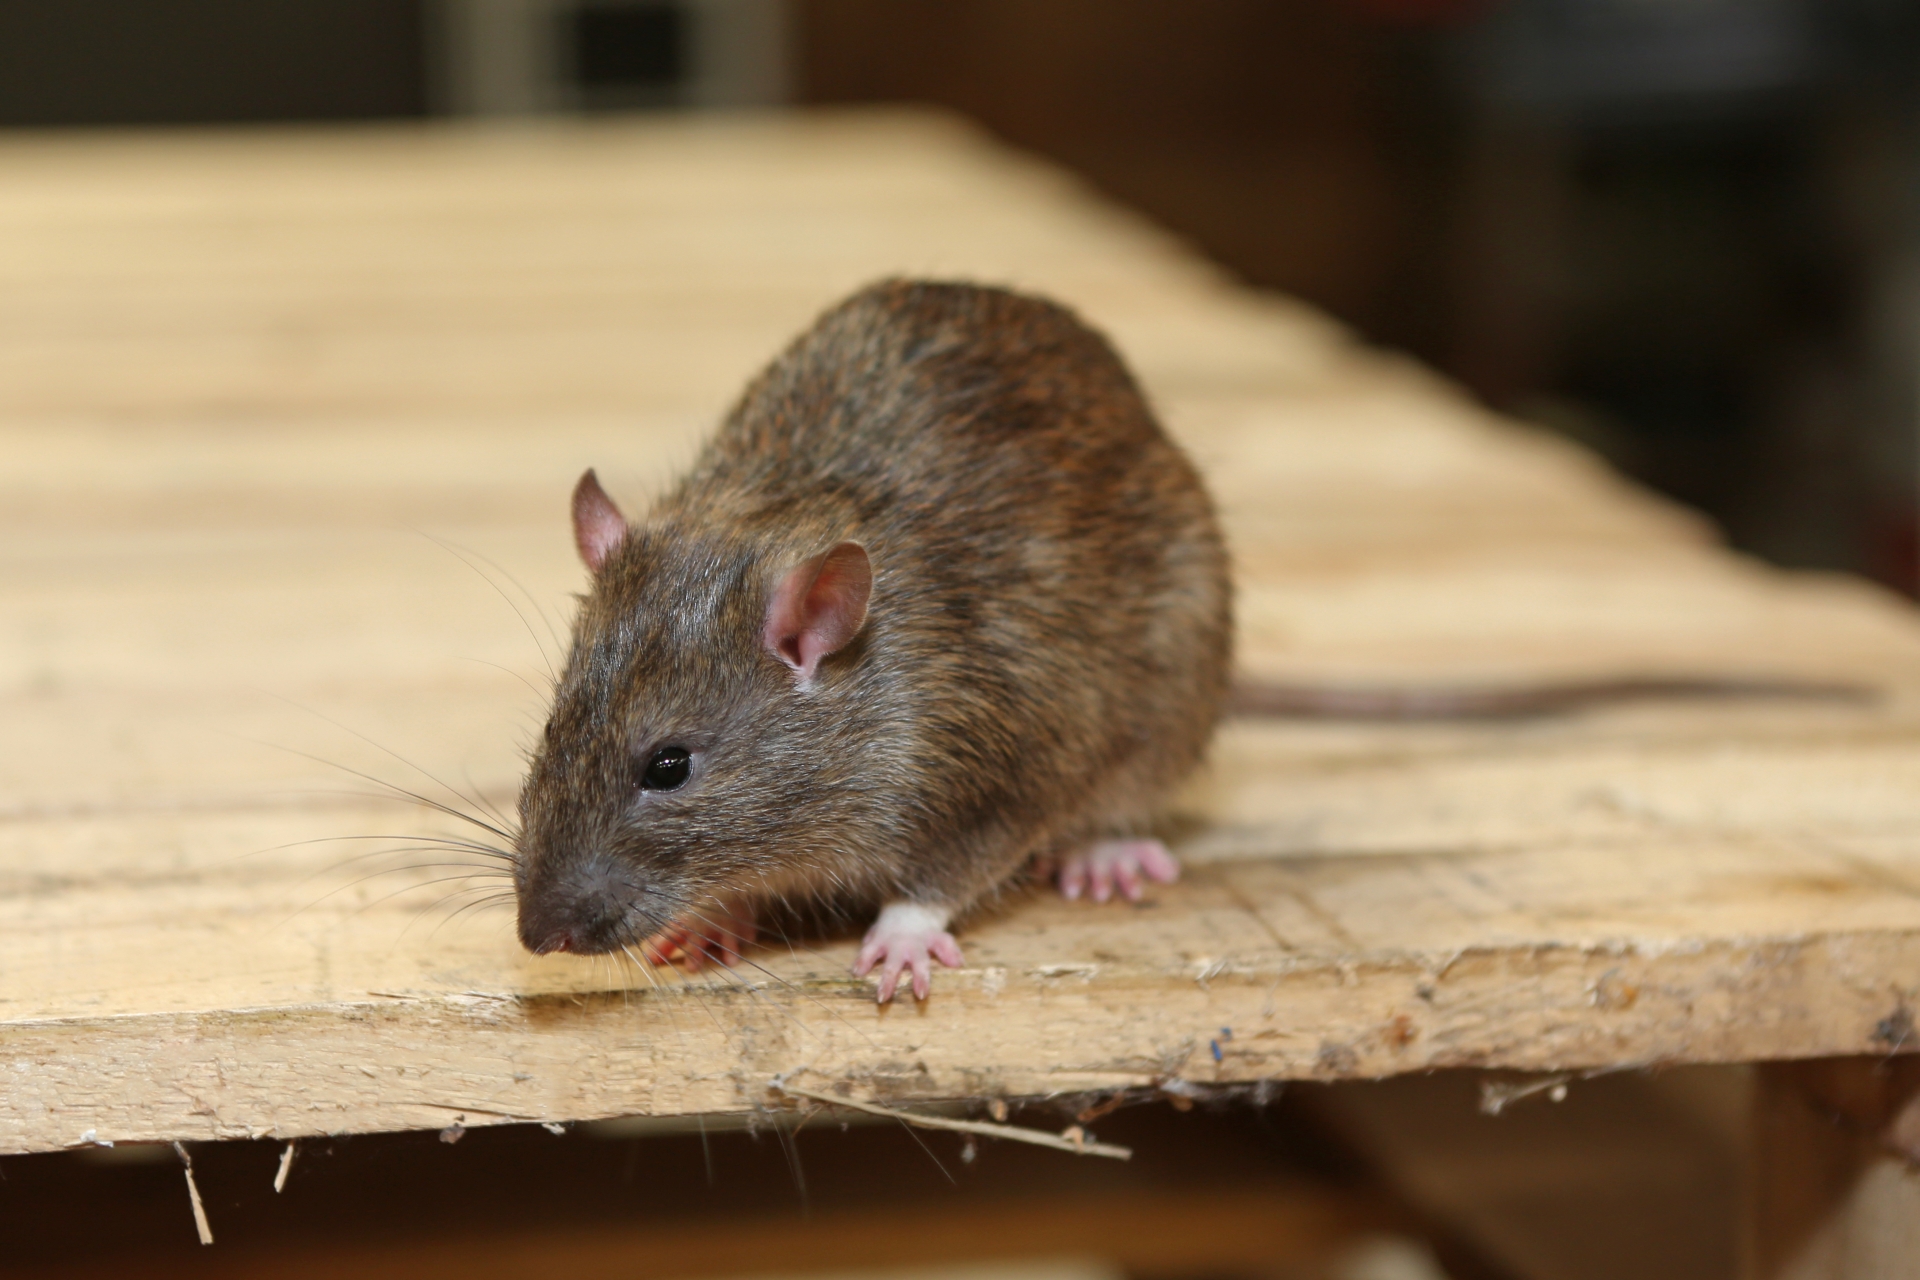 Rat extermination, Pest Control in Thames Ditton, Weston Green, KT7. Call Now 020 8166 9746